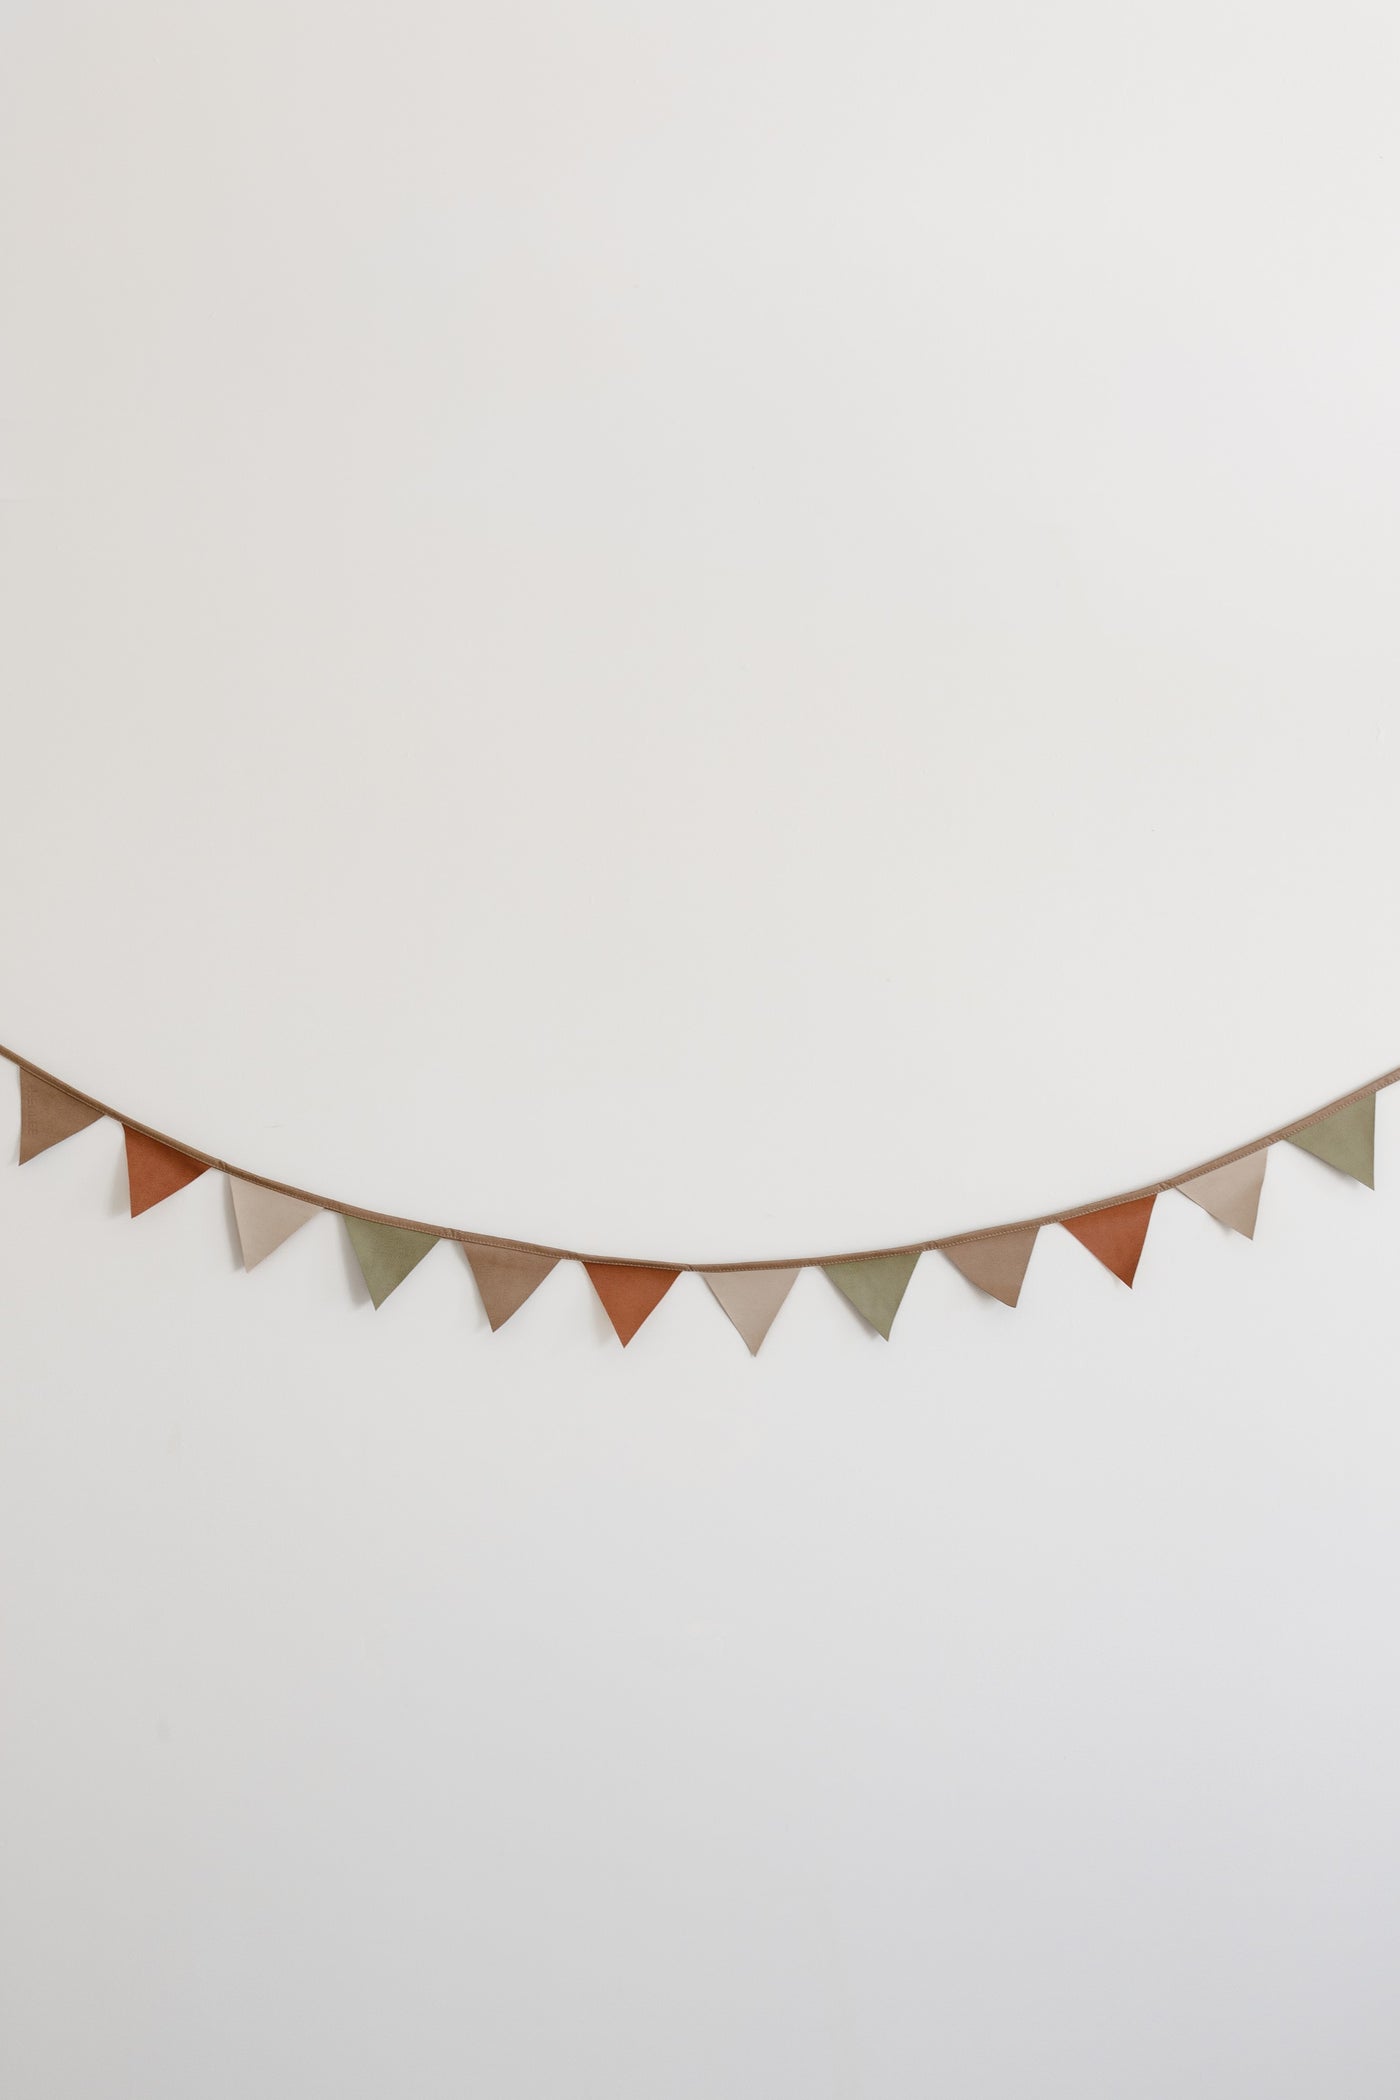 Garland Bunting Flags - henlee.co